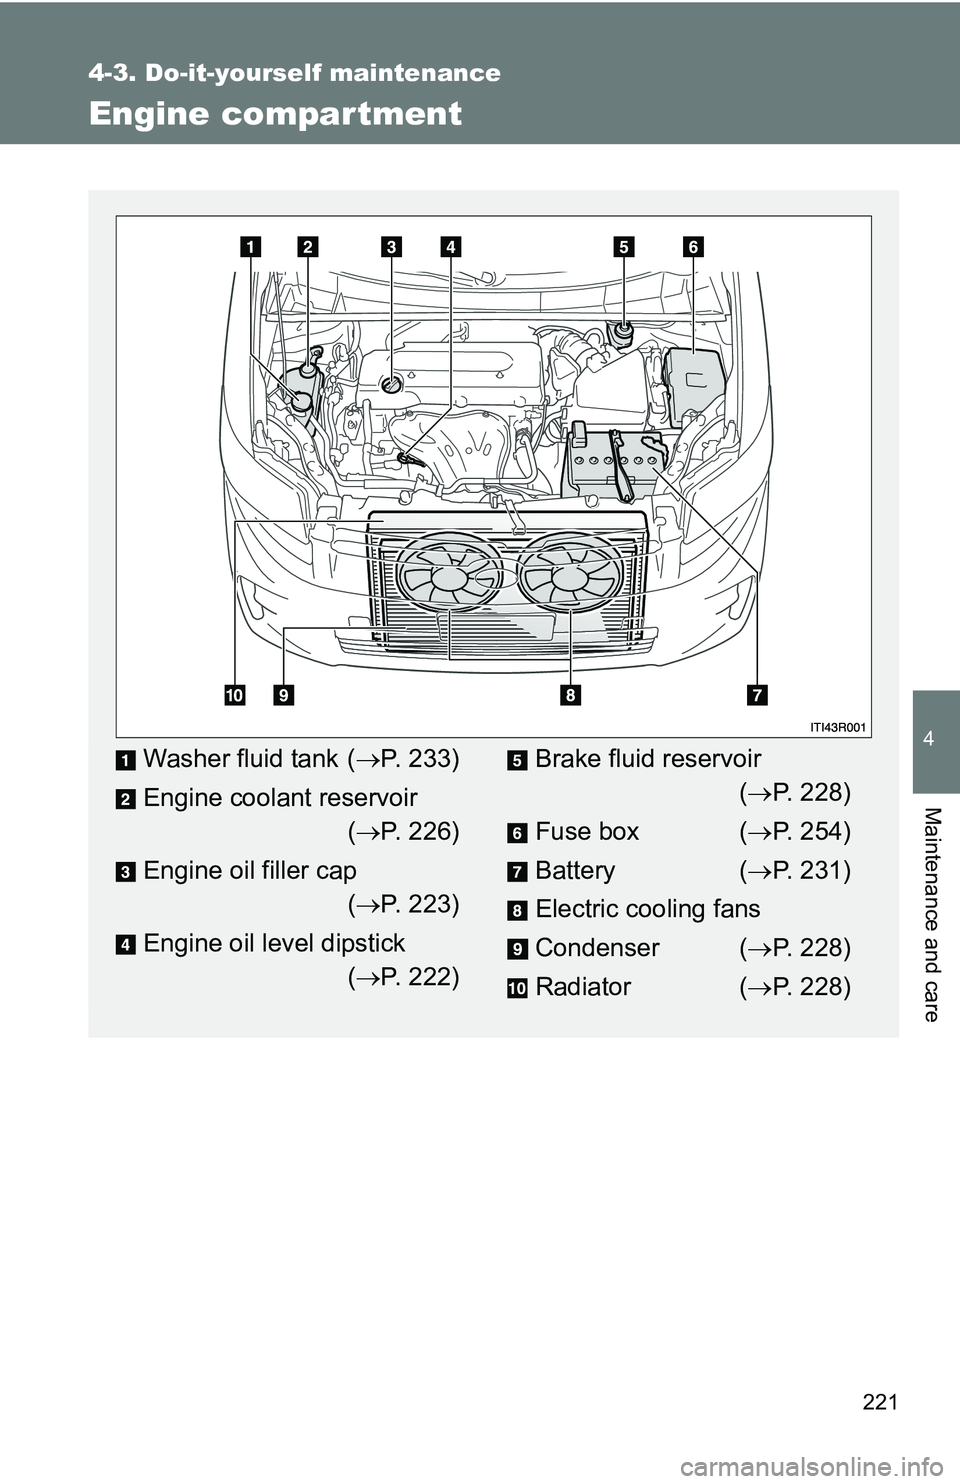 TOYOTA xB 2011  Owners Manual (in English) 221
4-3. Do-it-yourself maintenance
4
Maintenance and care
Engine compar tment
Washer fluid tank (P. 233)
Engine coolant reservoir ( P. 226)
Engine oil filler cap ( P. 223)
Engine oil level d